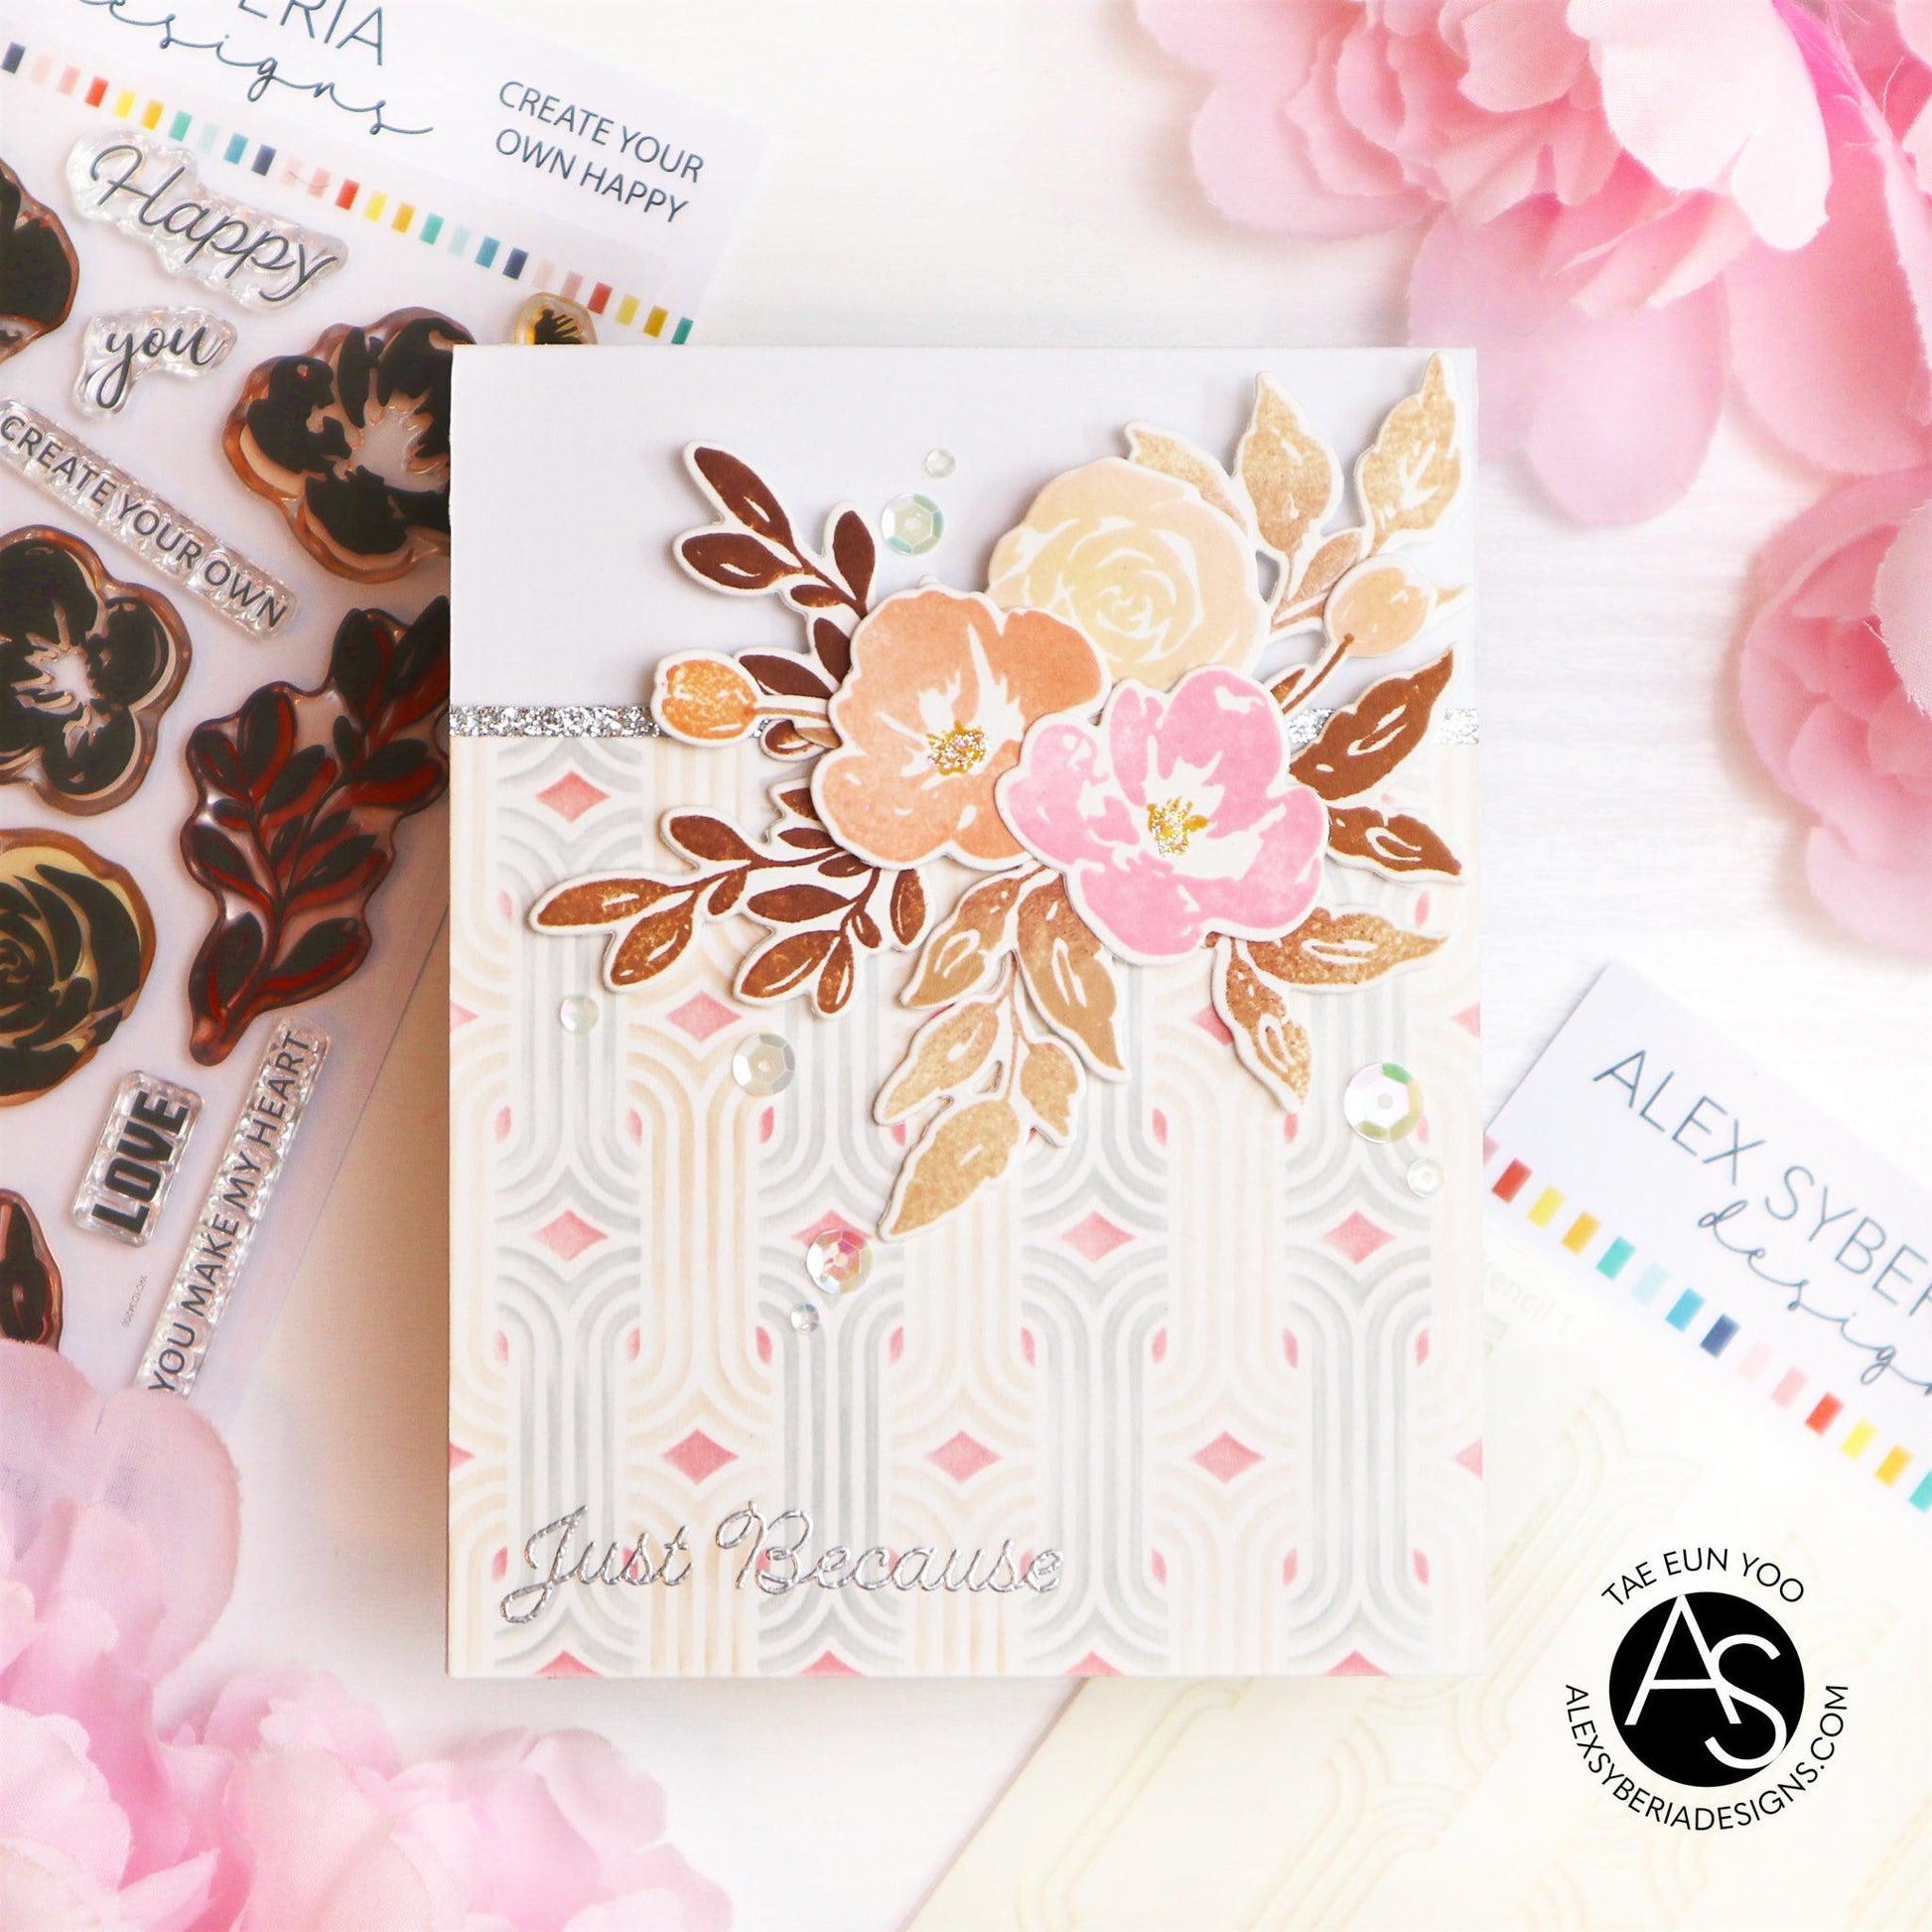 modern-weave-layering-stencil-alex-syberia-designs-cardmaking-tutorials-tips-create-your-happy-floral-stamp-leaves-cardmaking-inspiration-products-glitter